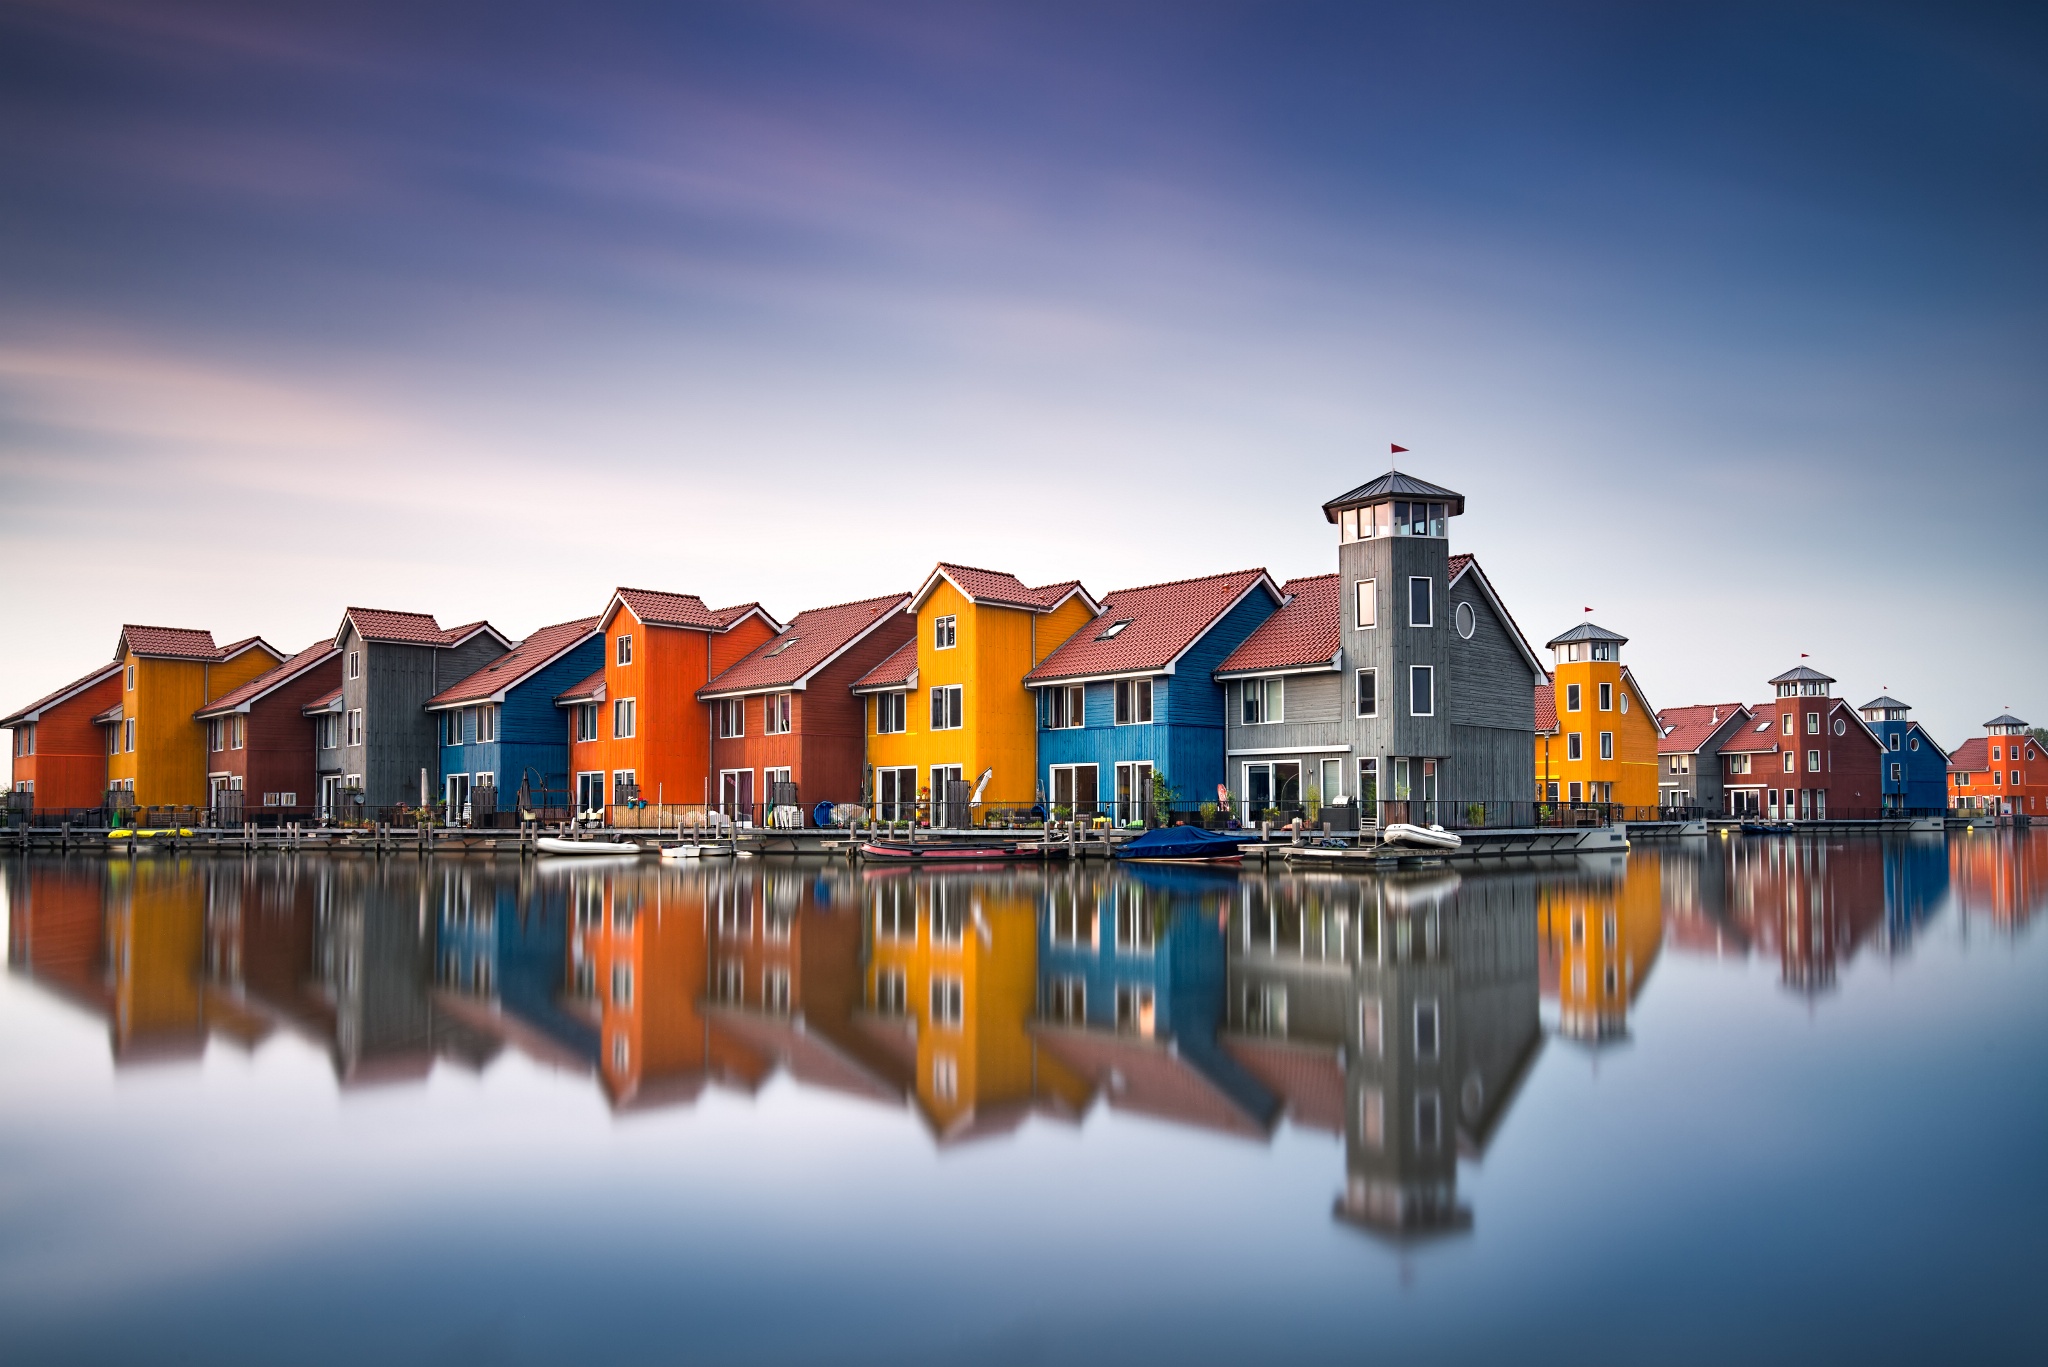 General 2048x1367 water reflection house colorful boat Dutch